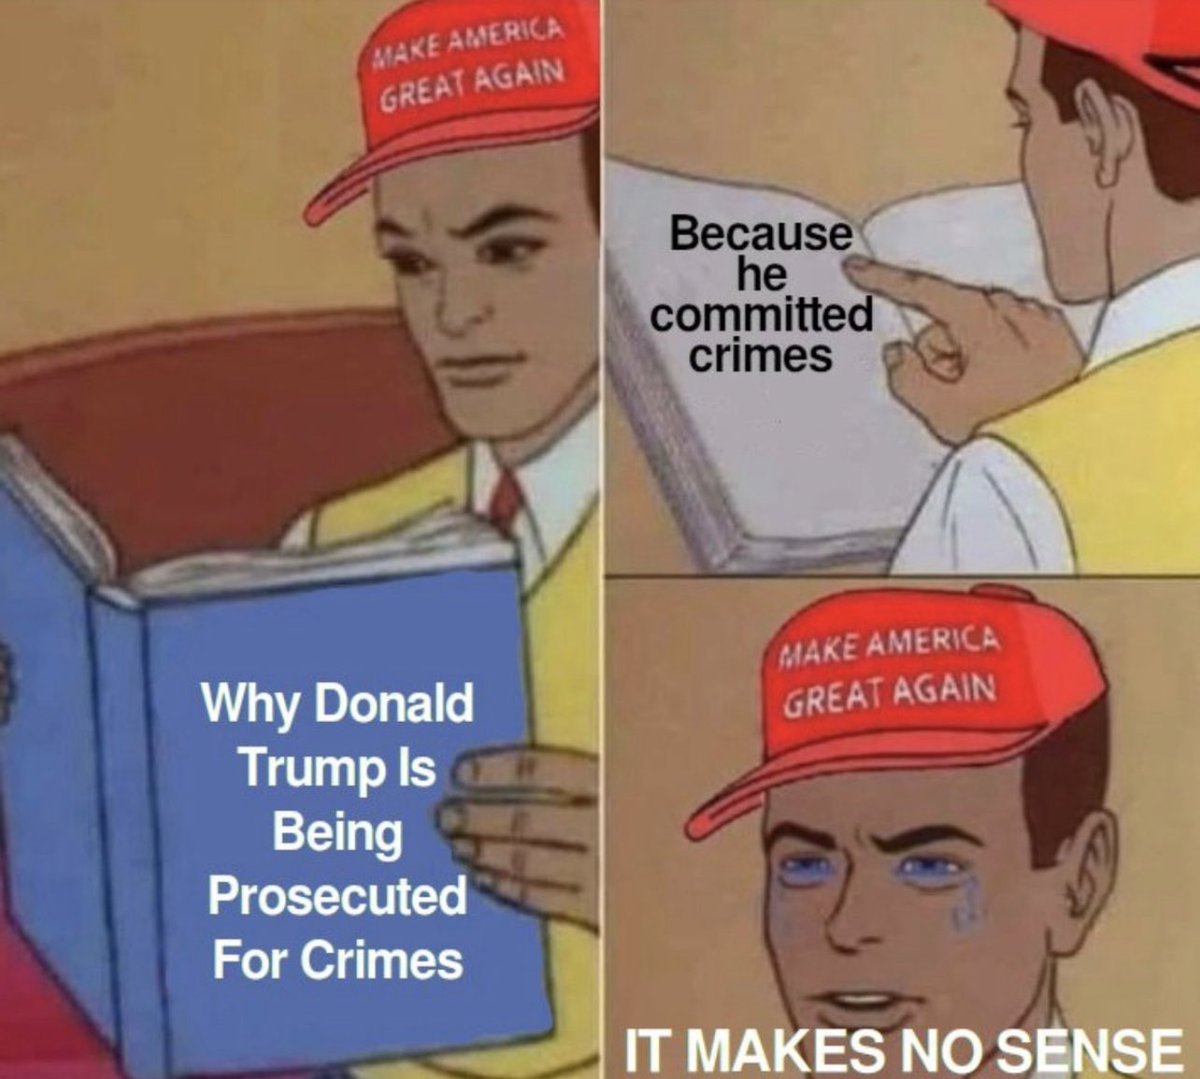 @TrumpDailyPosts I apologize for posting this so many times but it's so relevant these people don't get how our justice system works.